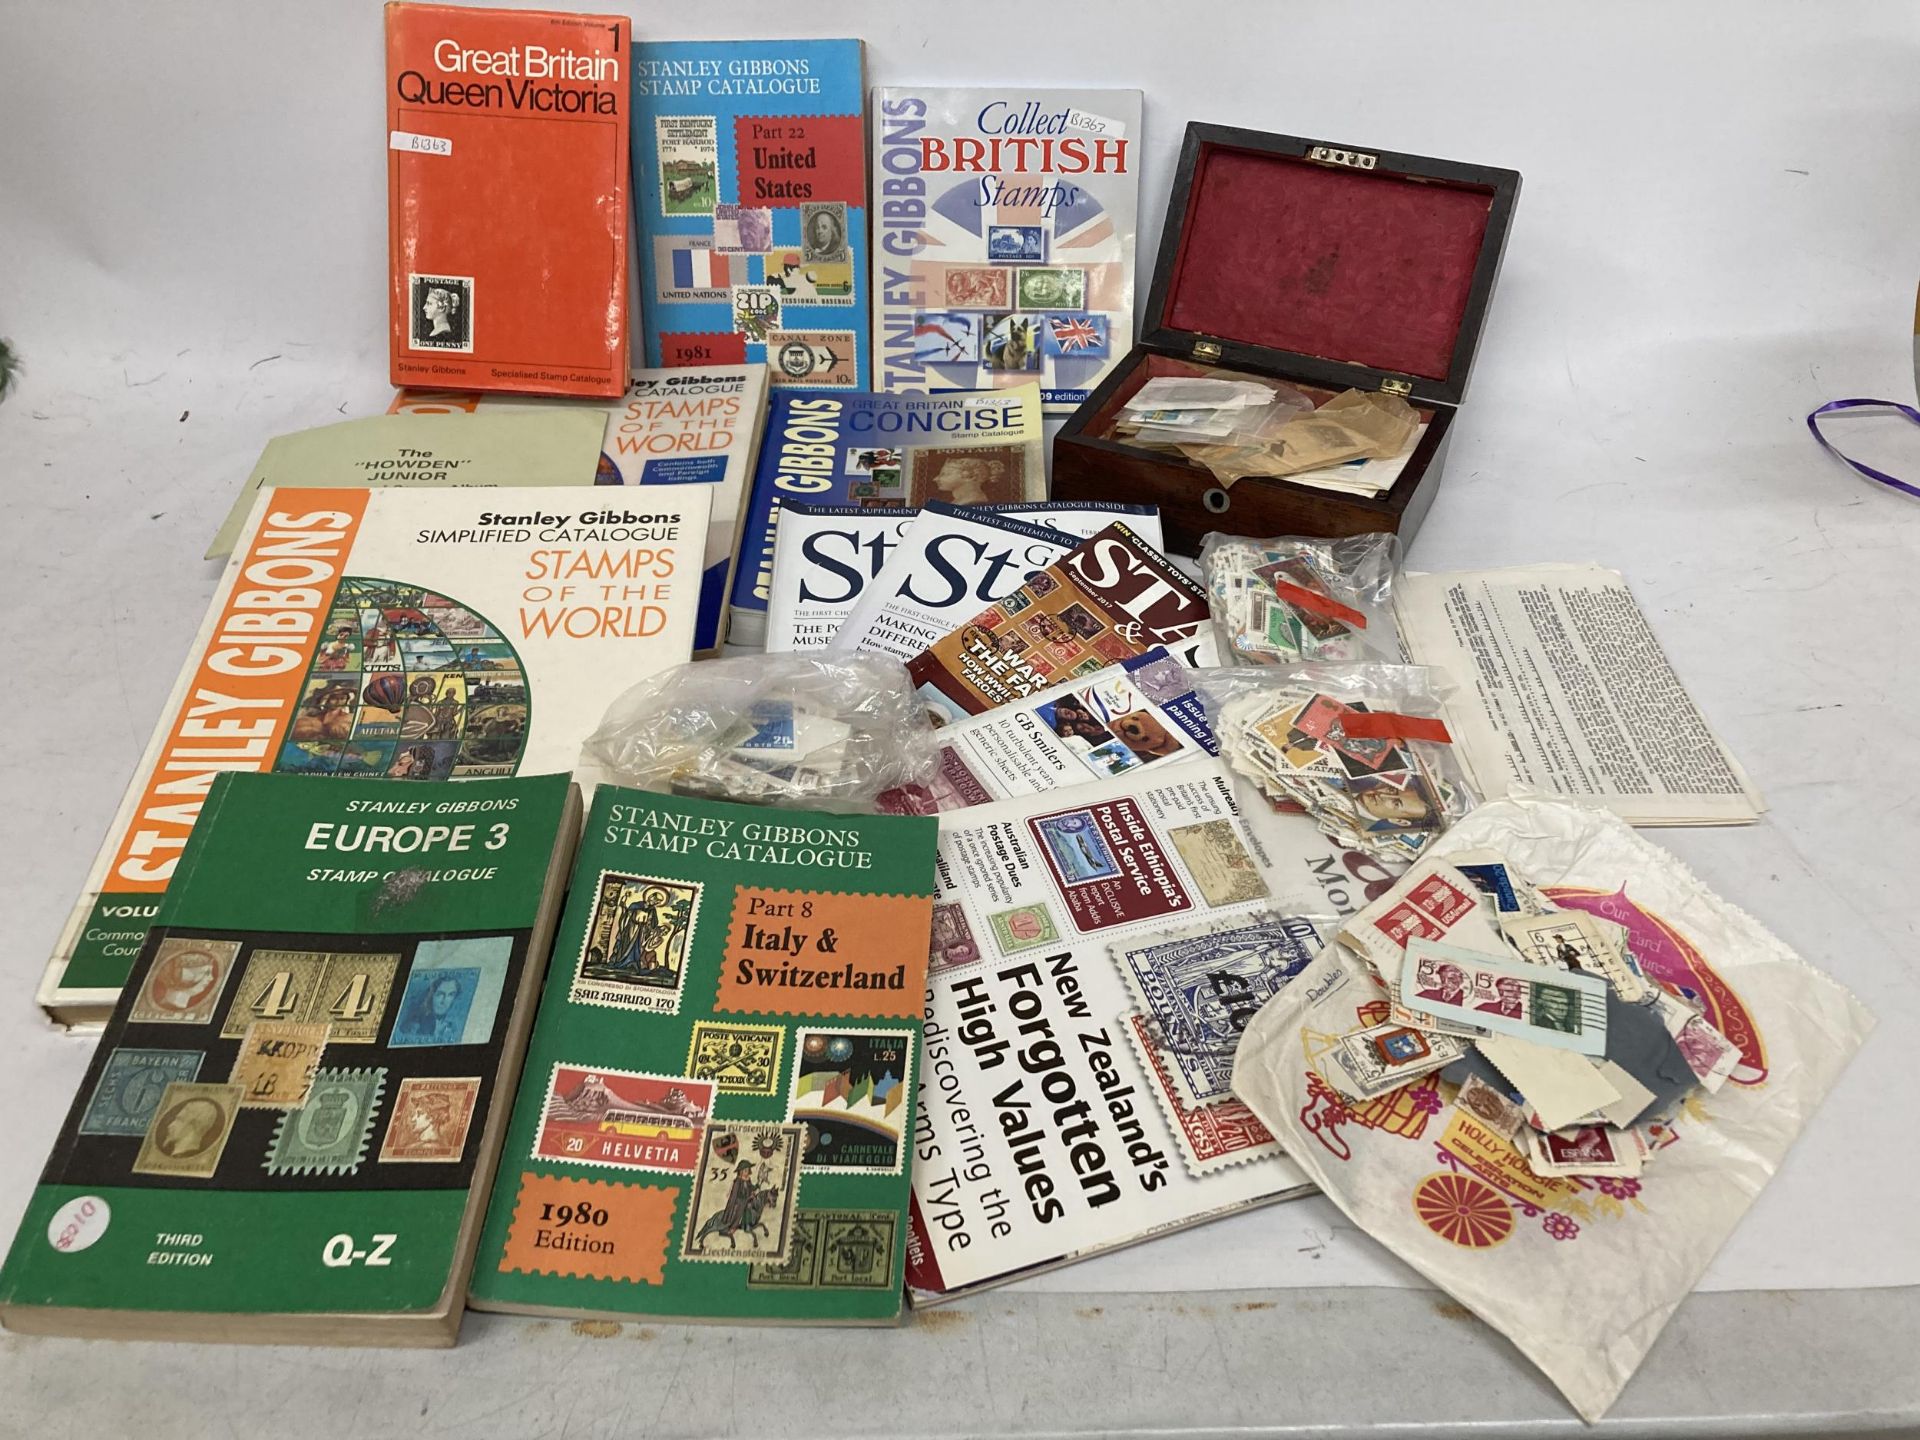 VARIOUS ITEMS TO INCLUDE TWO STANLEY GIBBONS STAMP BOOKS 1995 - 2001, FIVE STAMP MAGAZINES, SIX